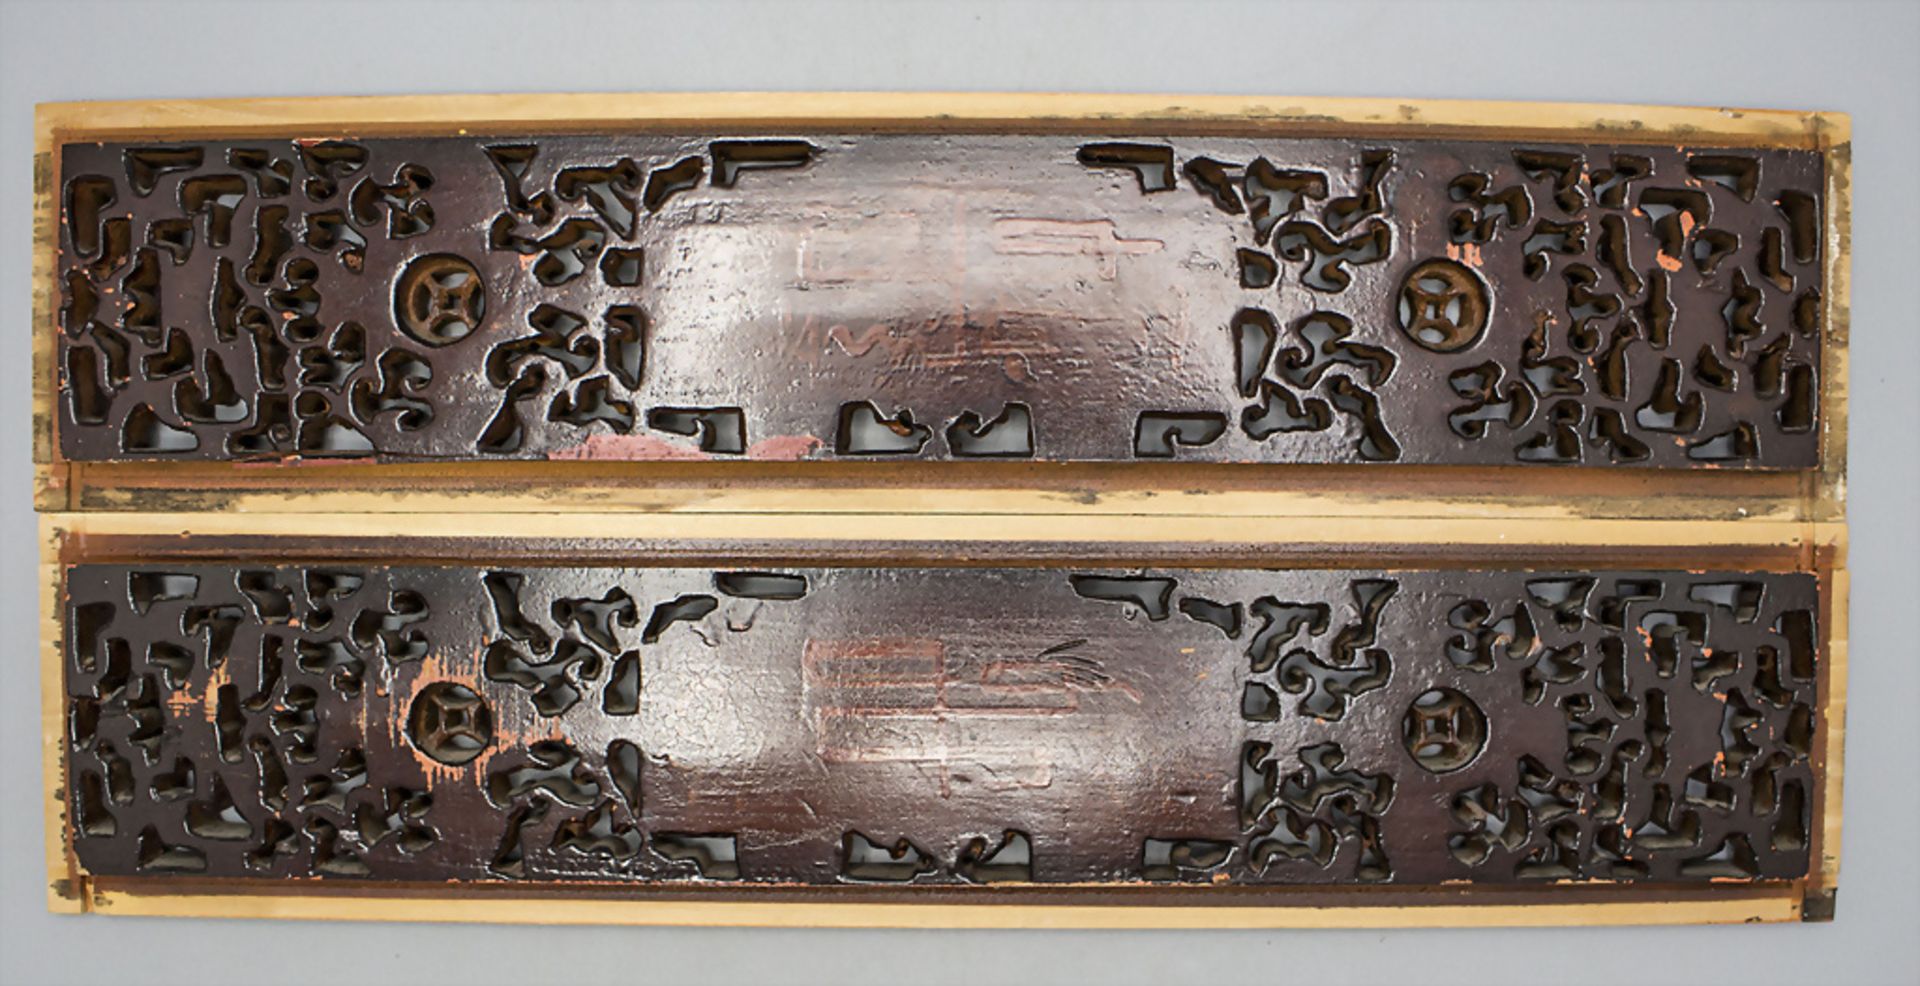 Paar Holzpaneele in Ajourtechnik / A pair of wood panel in ajour technique, China, 19. Jh. - Image 2 of 2